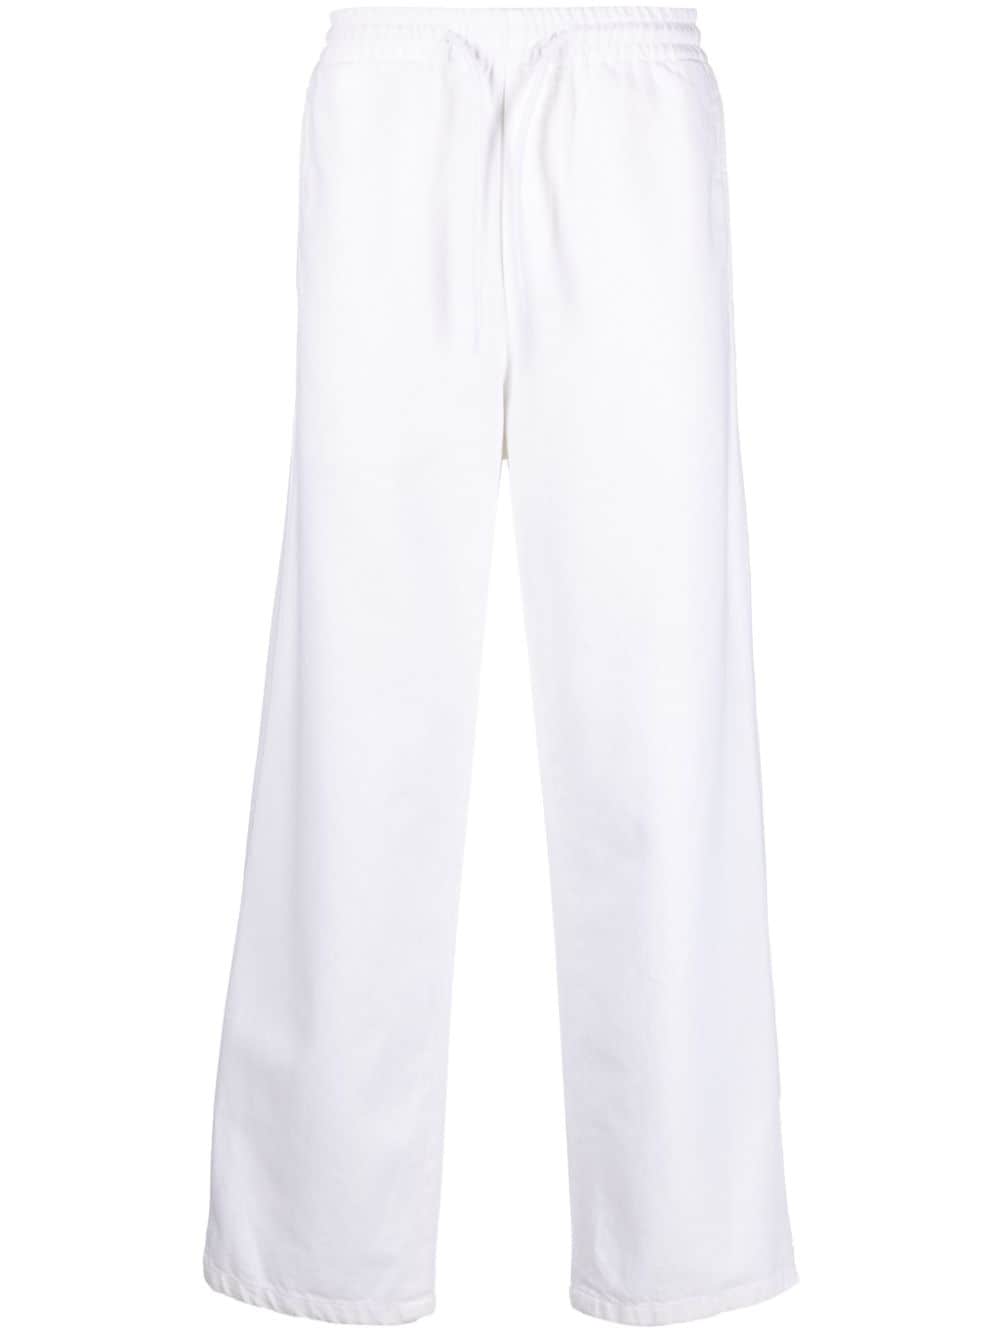 Vincent twill cotton trousers